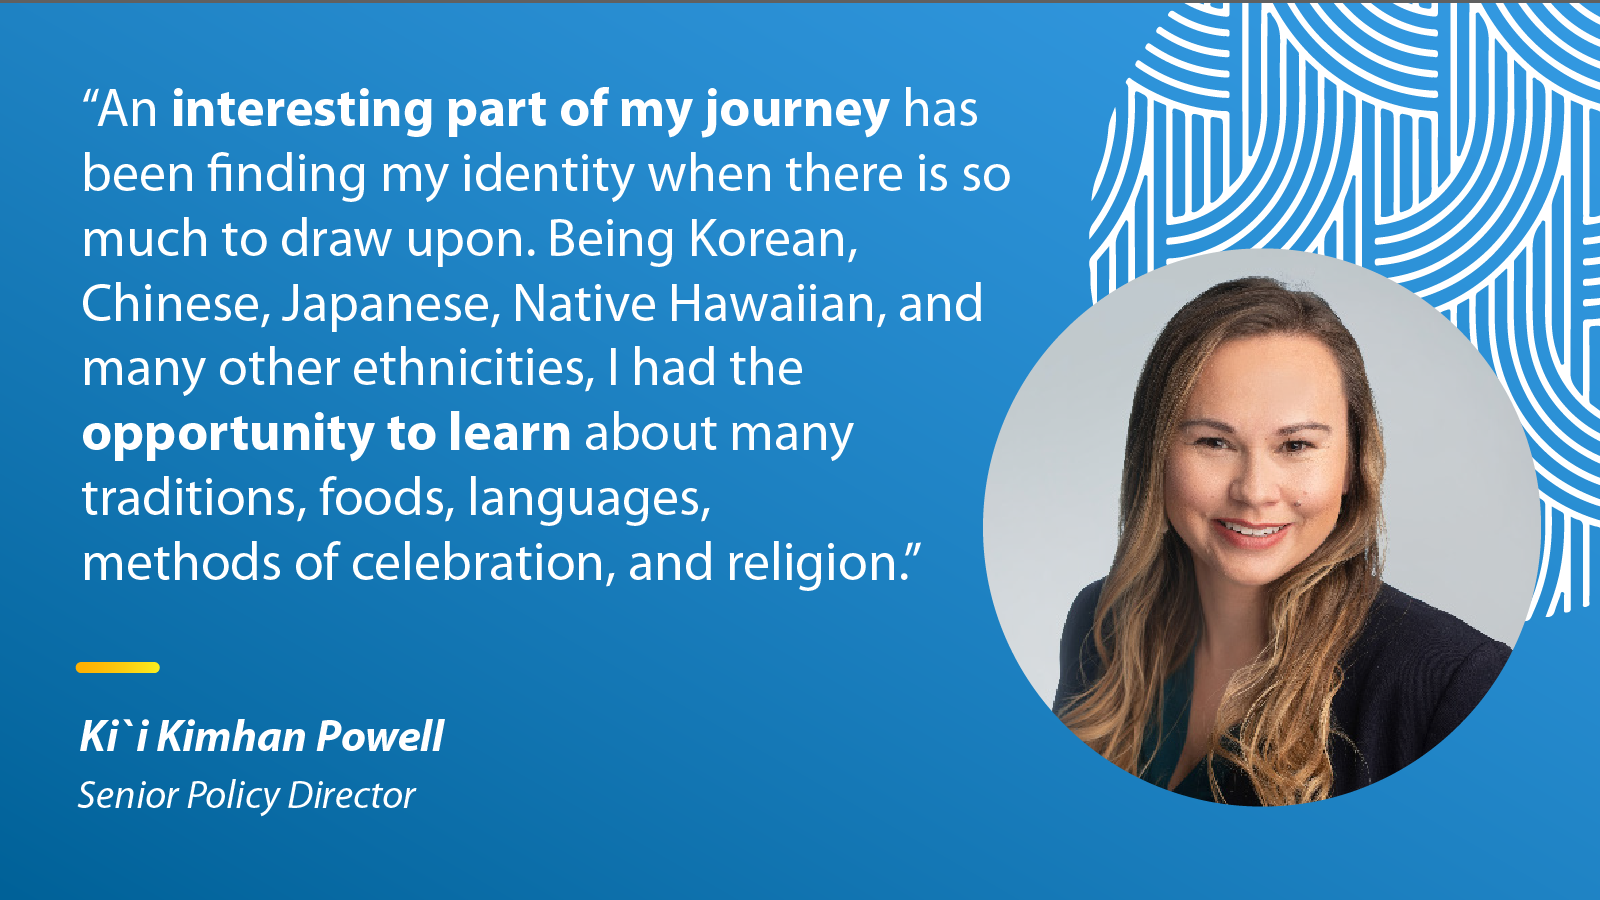 "An interesting part of my journey has been finding my identity when there is so much to draw upon. Being Korean, Chinese, Japanese, Native Hawaiian, and many other ethnicities, I had the opportunity to learn about many traditions, foods, languages, methods of celebration, and religion." Ki`i Kimhan Powell, Senior Policy Director